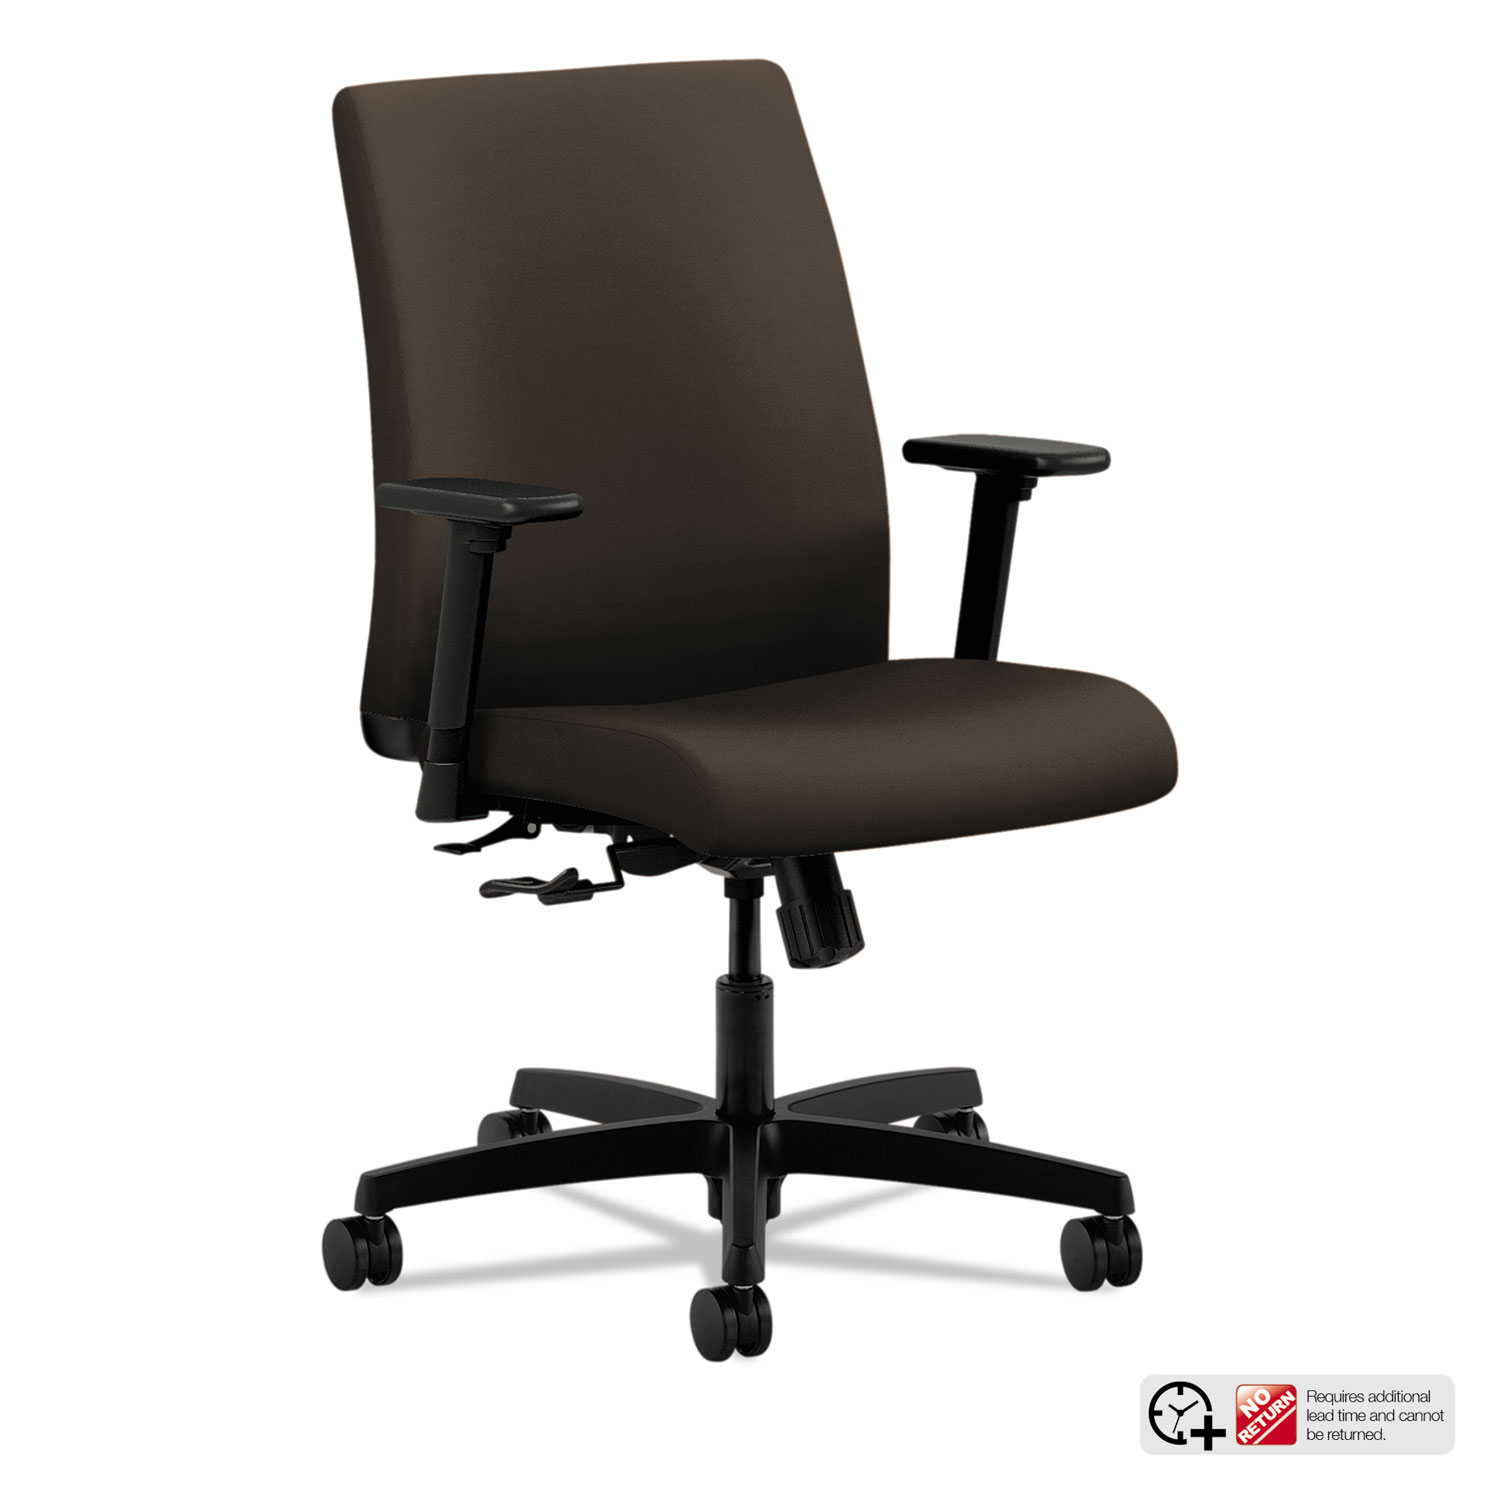  HON HITL1.A.H.U.CU49.T.SB Ignition Series Fabric Low-Back Task Chair, Supports up to 300 lbs., Espresso Seat/Espresso Back, Black Base (HONIT105CU49) 